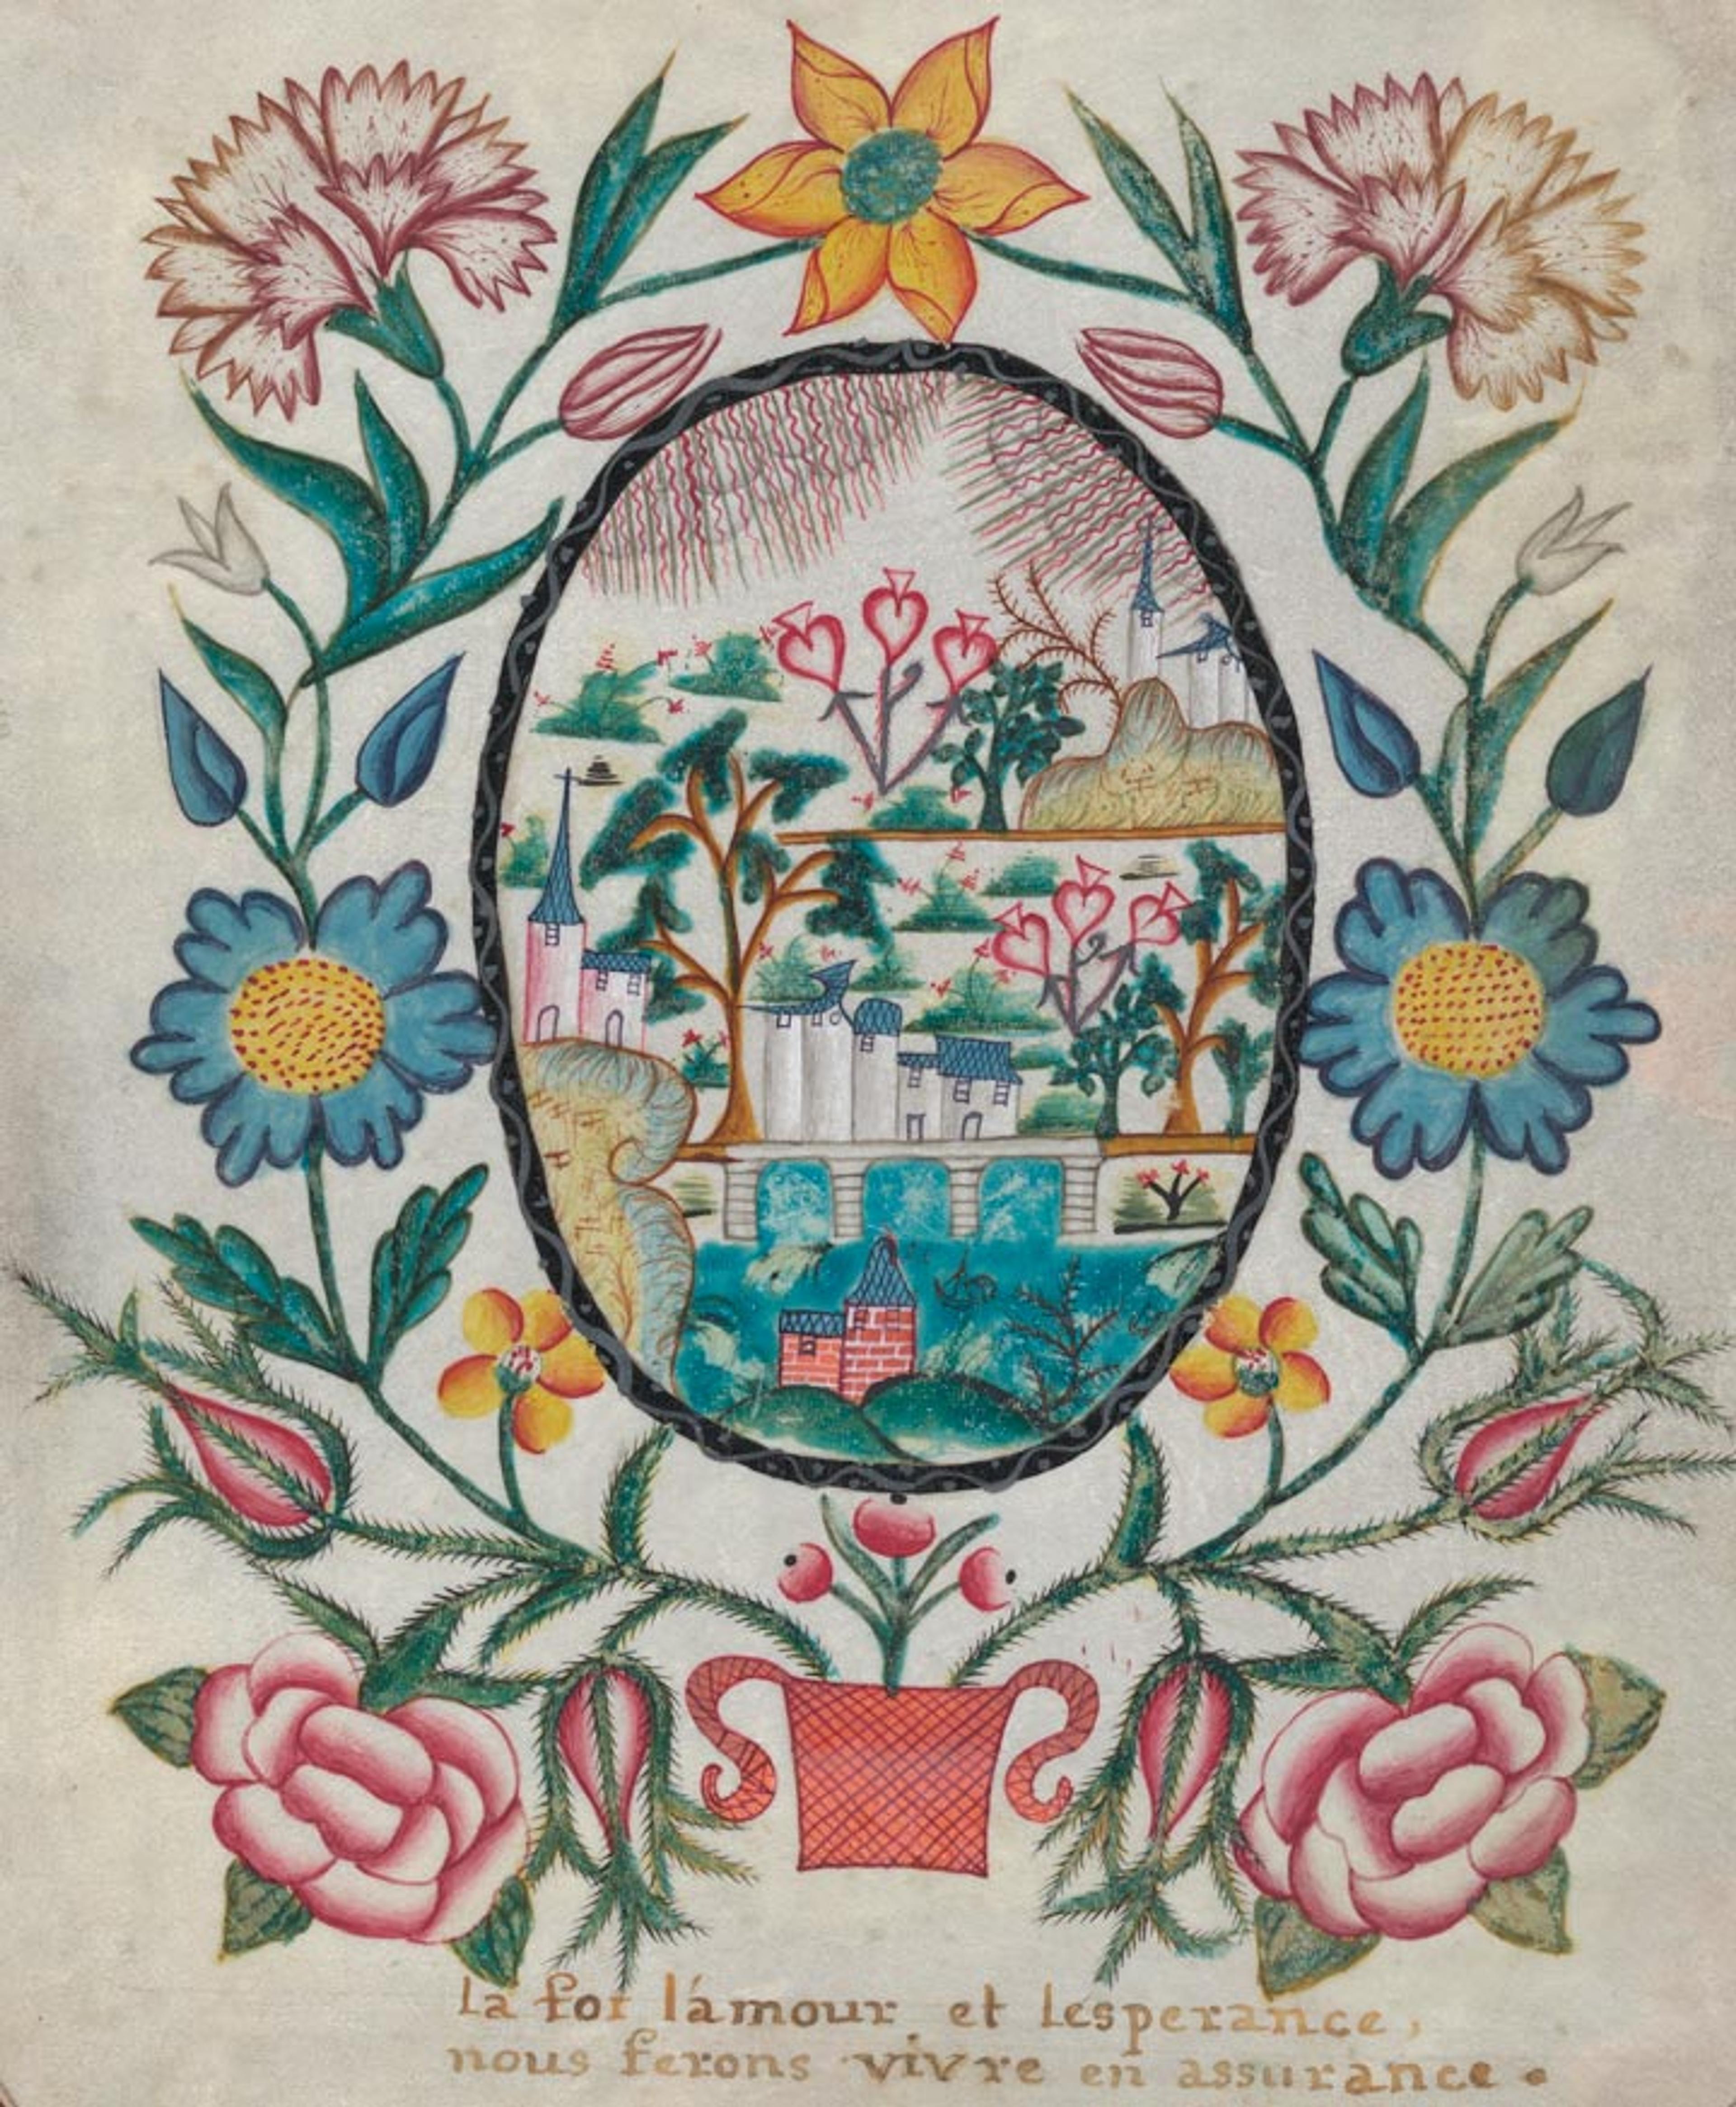 An 18th-century French valentine featuring a floral motif and a scene depicting a village landscape